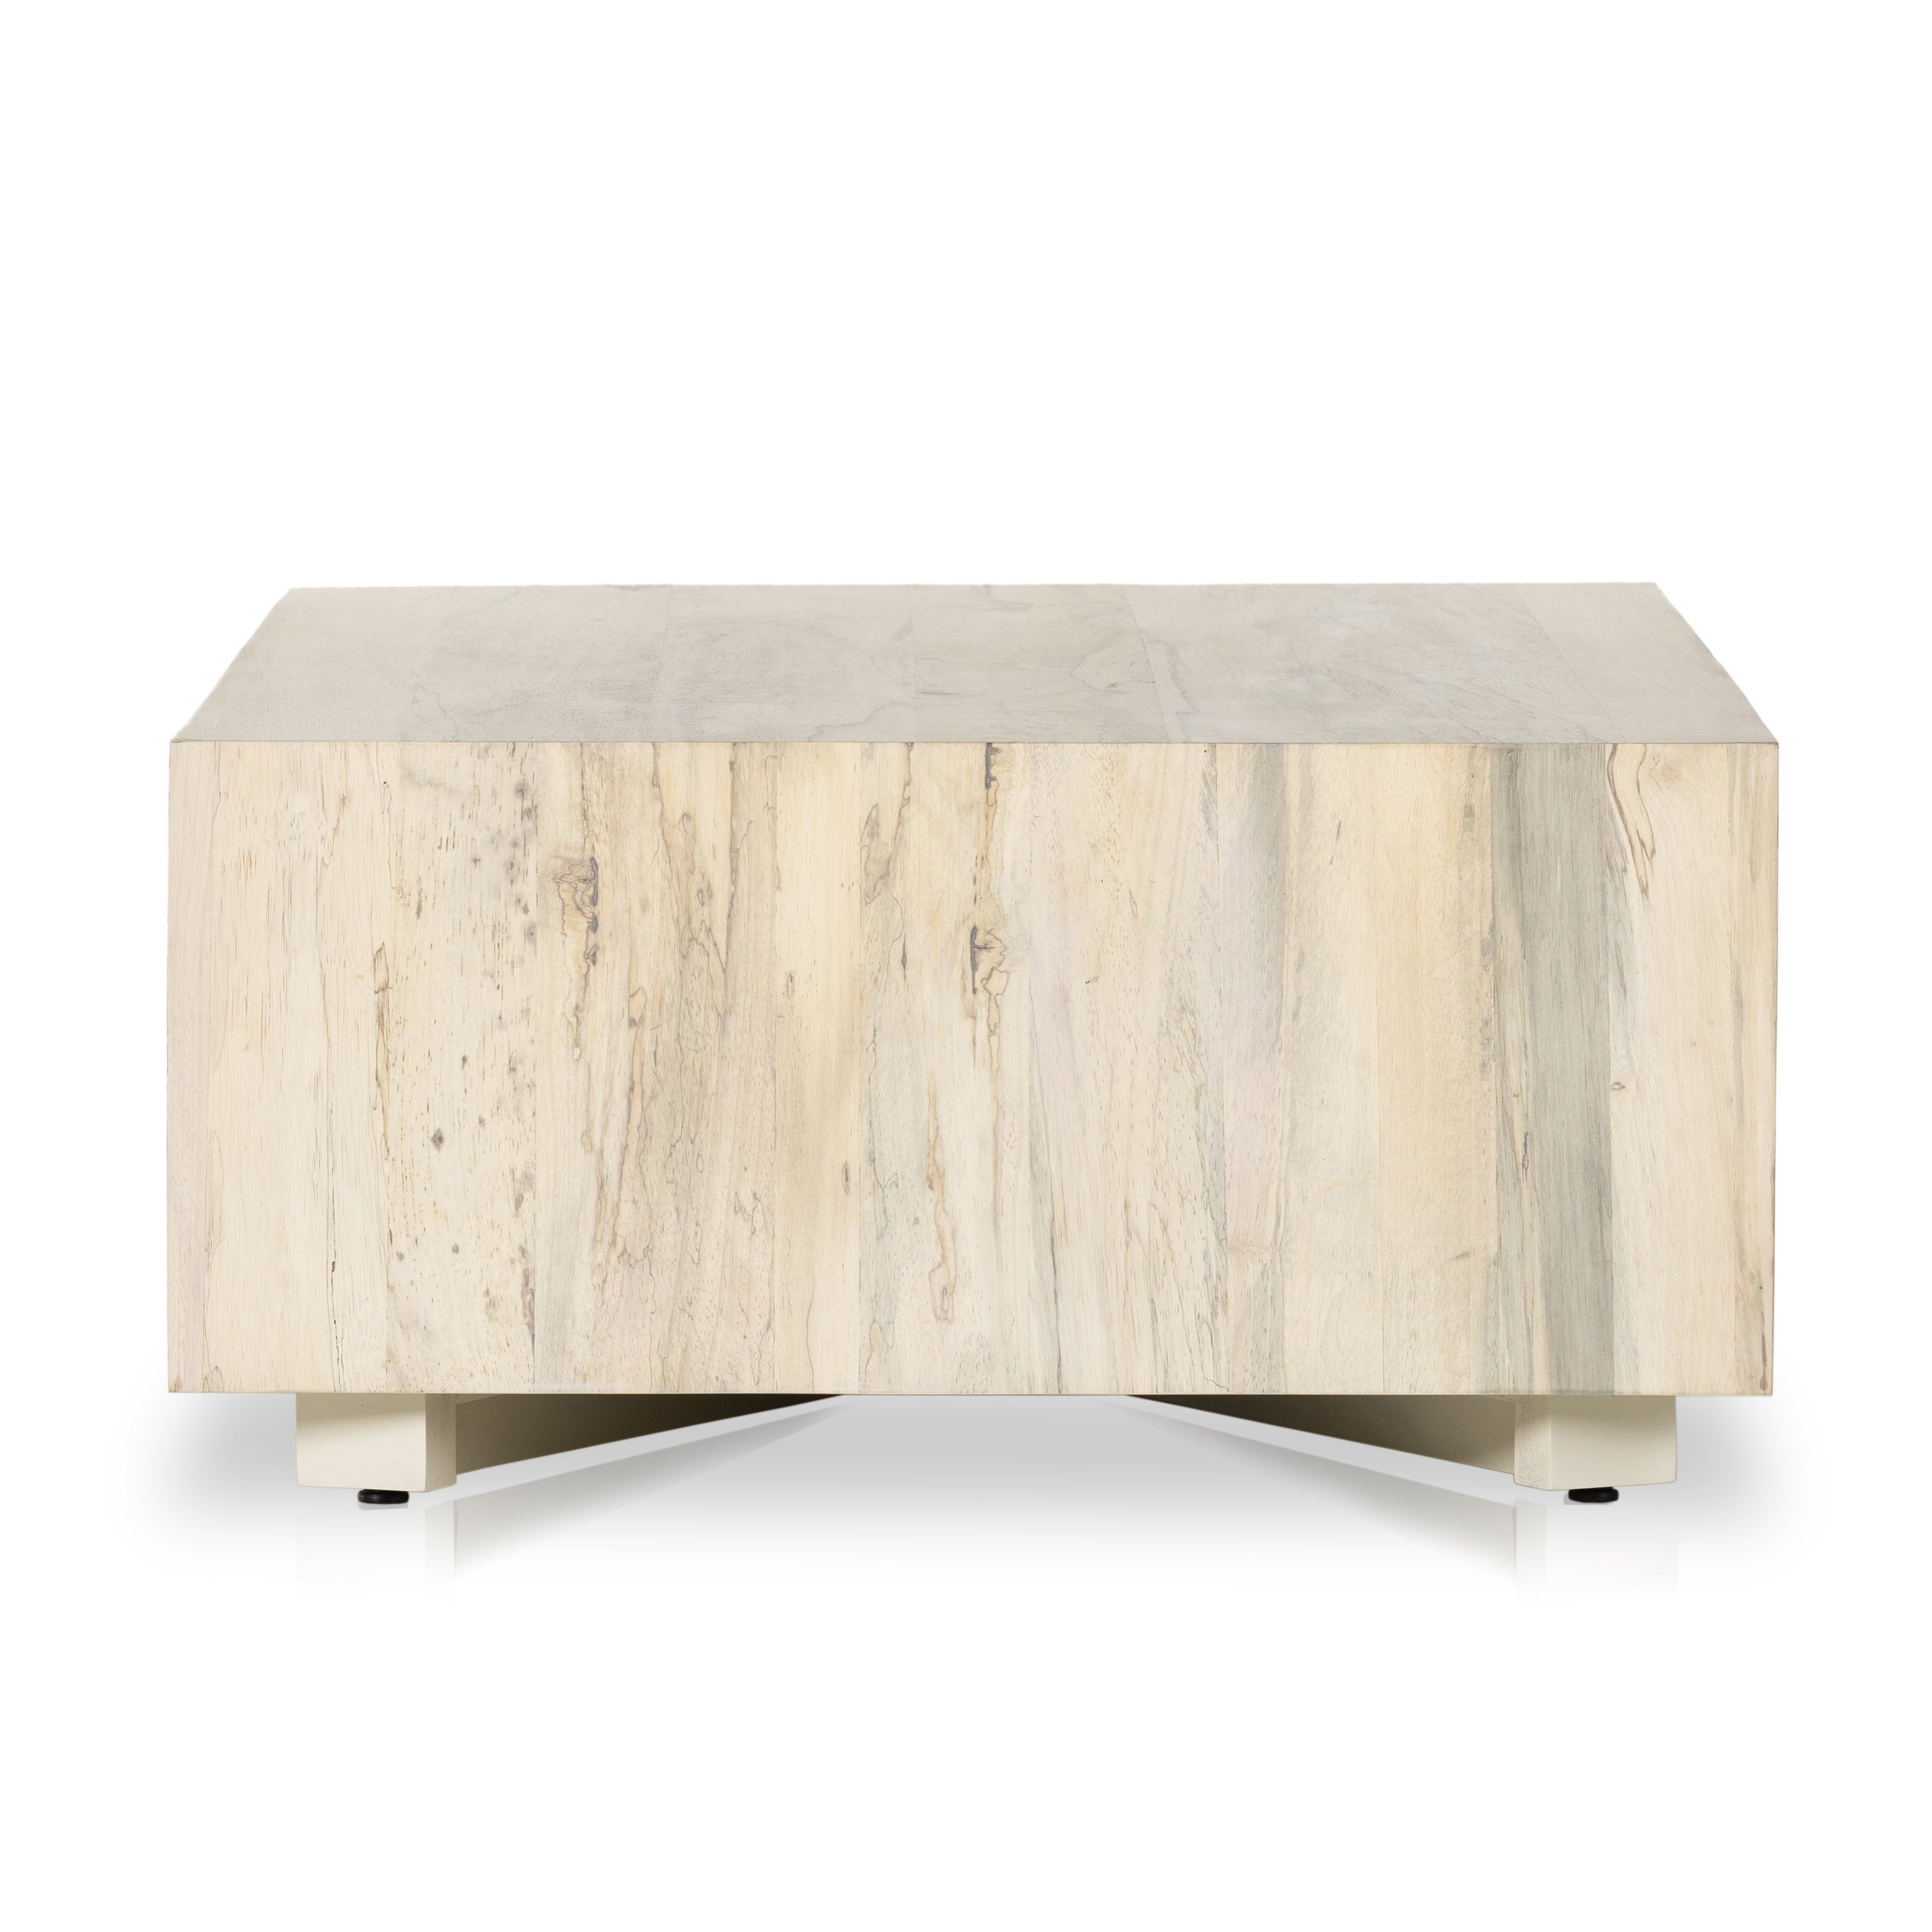 Stunning forces of nature, captured in a coffee table. Spalted primavera wood is hand-shaped into a rectangular silhouette and finished in a white hue. Reflective of woods' natural character, a slight color variance is possible from piece to piece. Amethyst Home provides interior design, new construction, custom furniture, and area rugs in the Des Moines metro area.